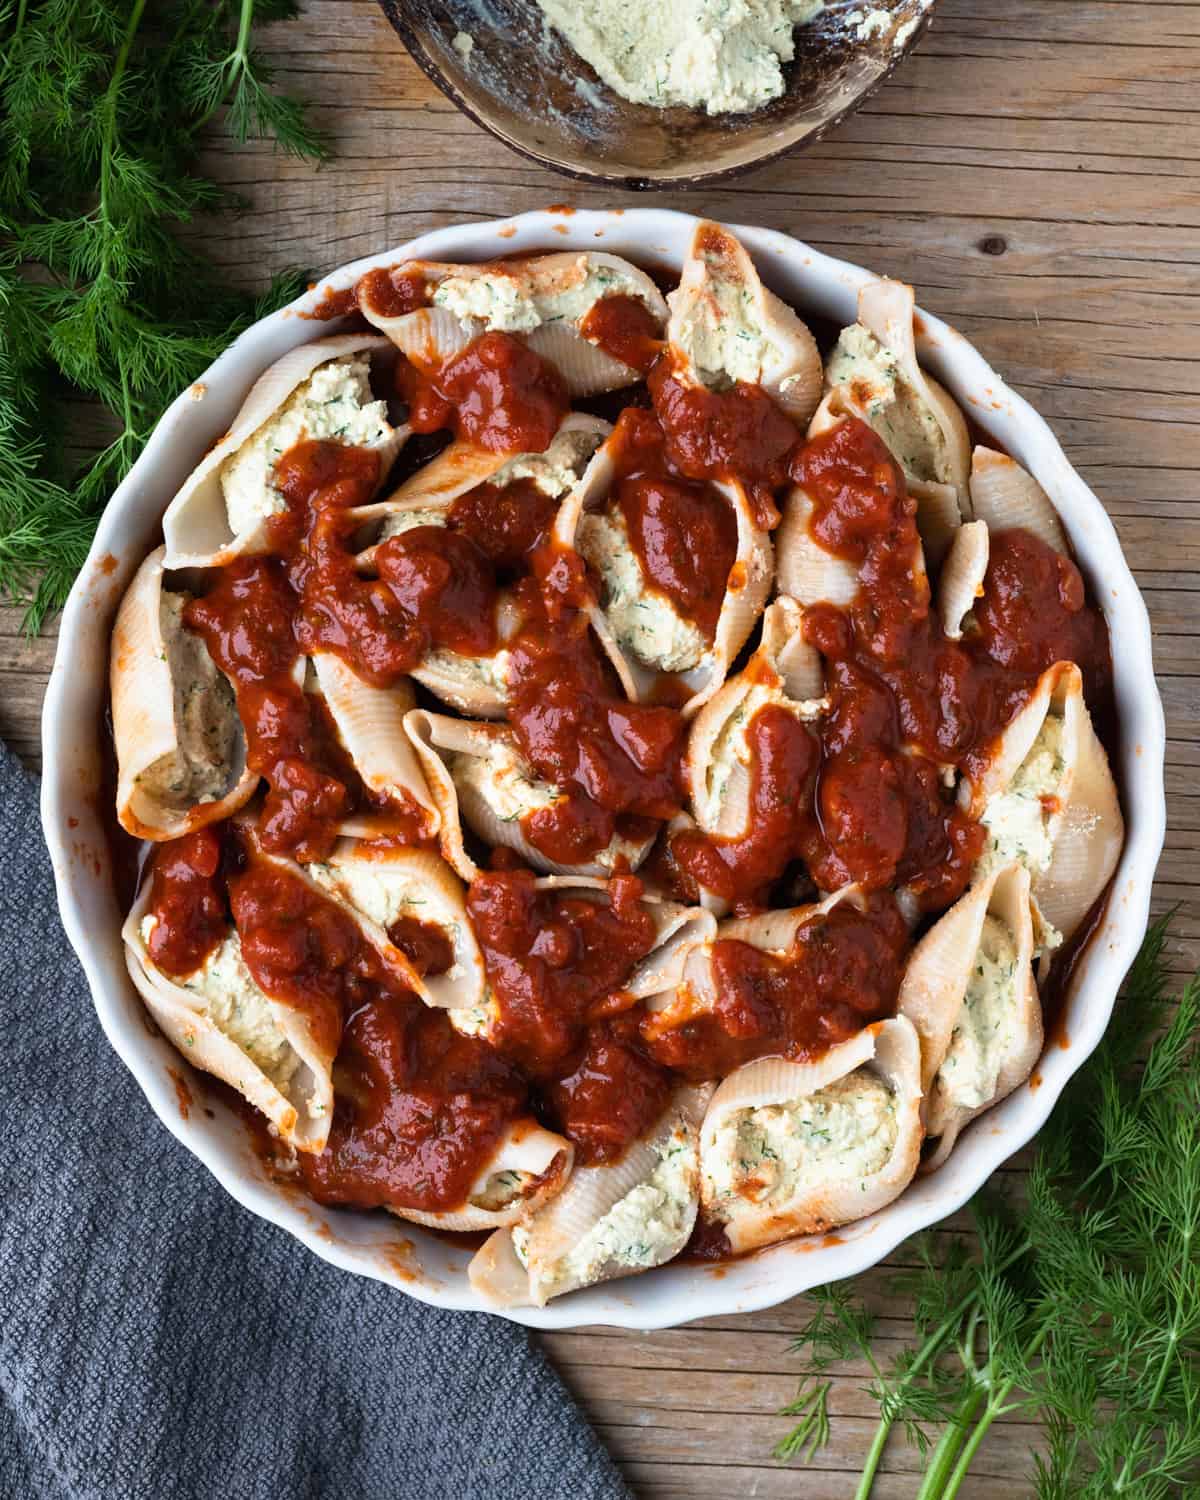 Top-down view of a plate of unbaked gluten-free pasta shells stuffed with tofu ricotta in tomato sauce. The dish is on a wooden table with fresh dill and a napkin.